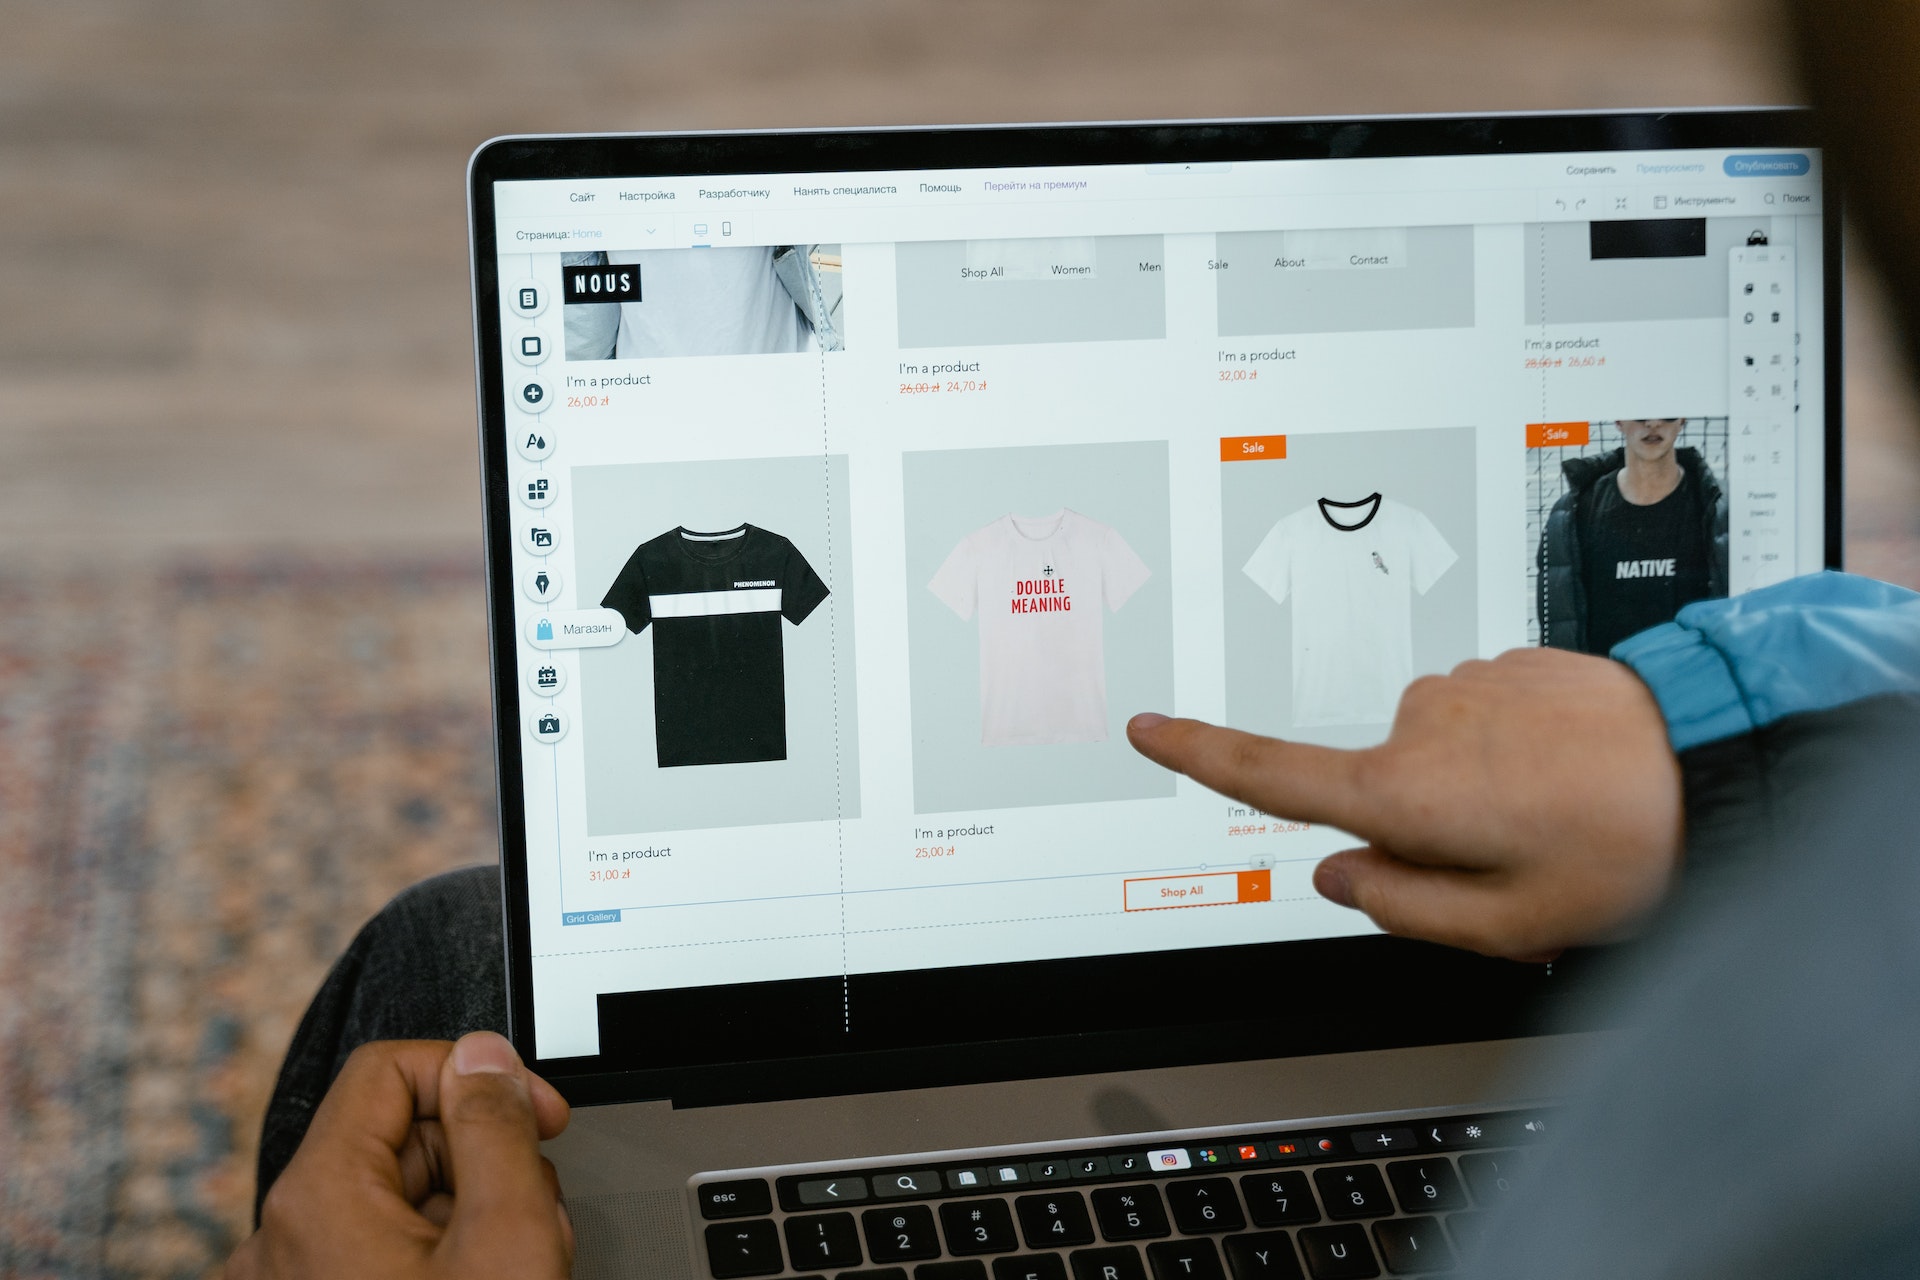 A laptop is open with a browser window displaying a clothing sales website while a hand points at an image of a t-shirt.